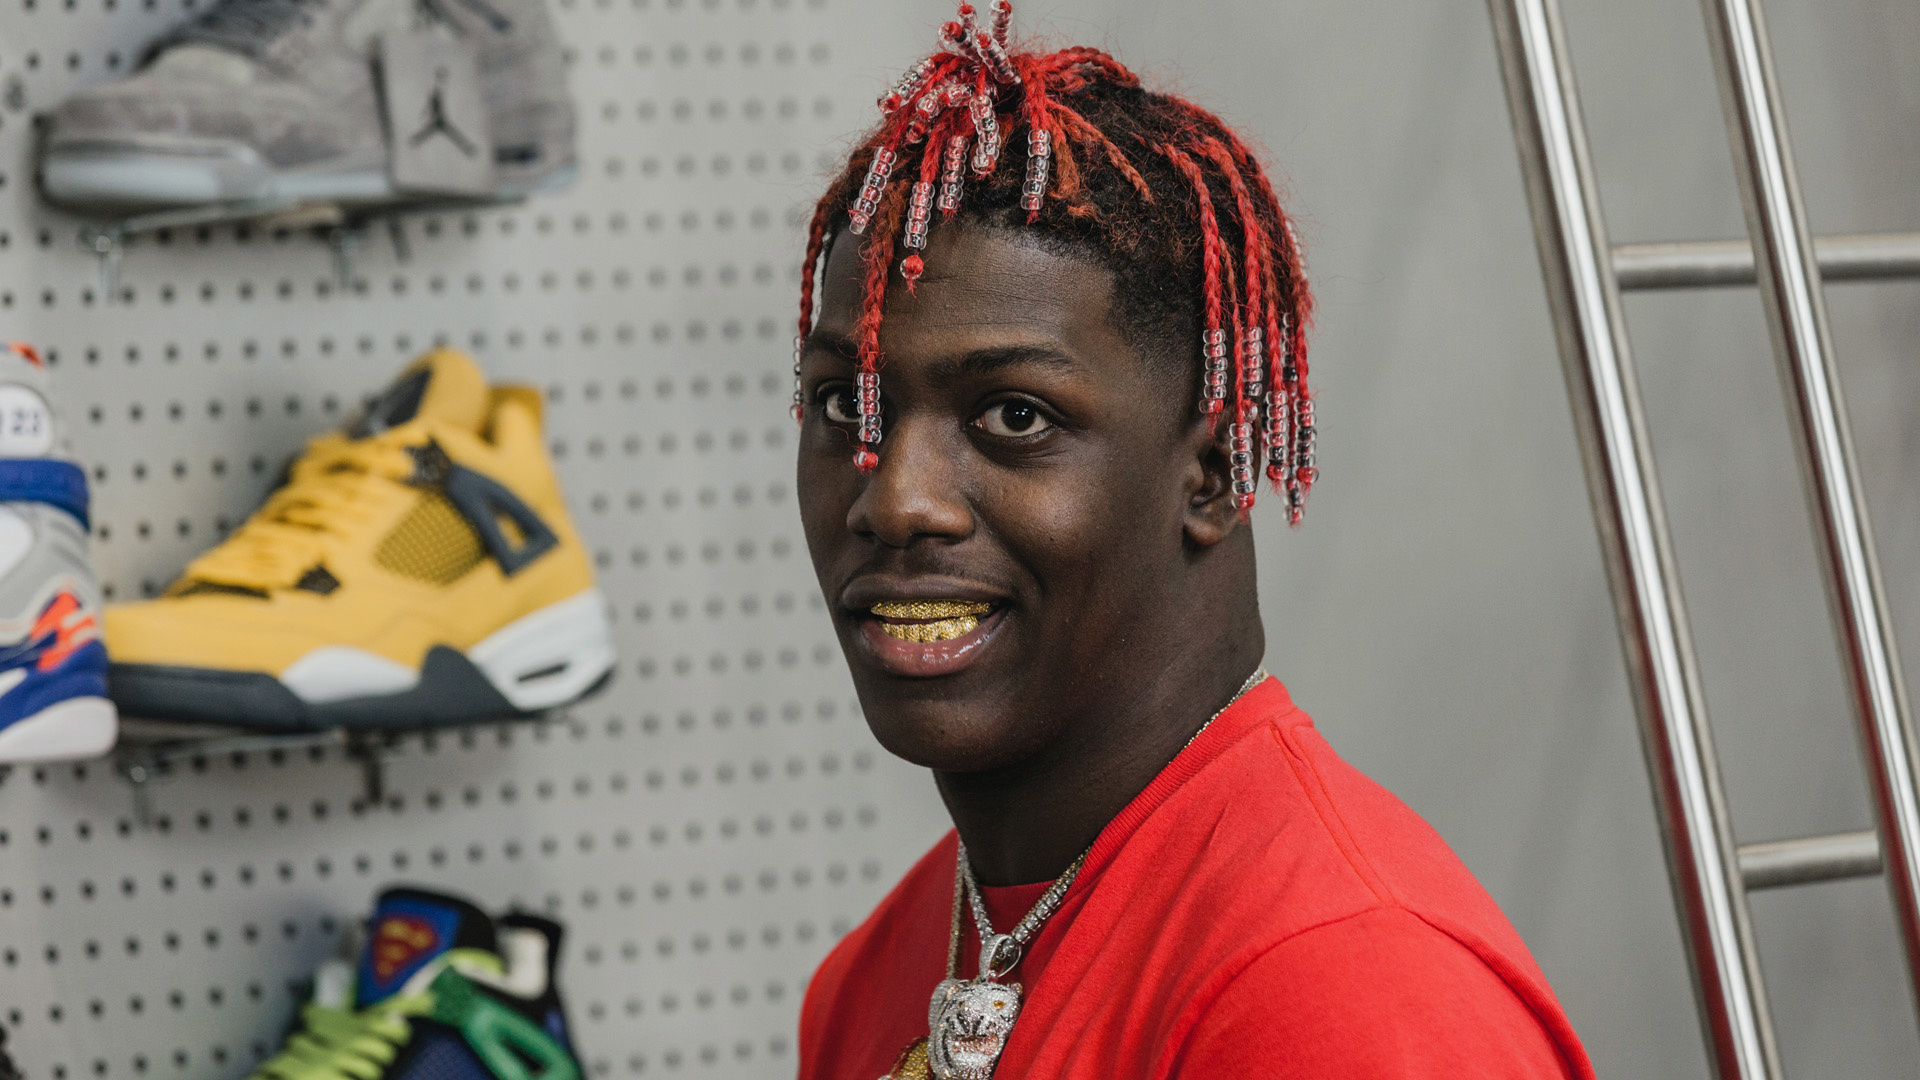 Lil Yachty, Reebok collaboration, Boat shoes, Exclusive release, 1920x1080 Full HD Desktop